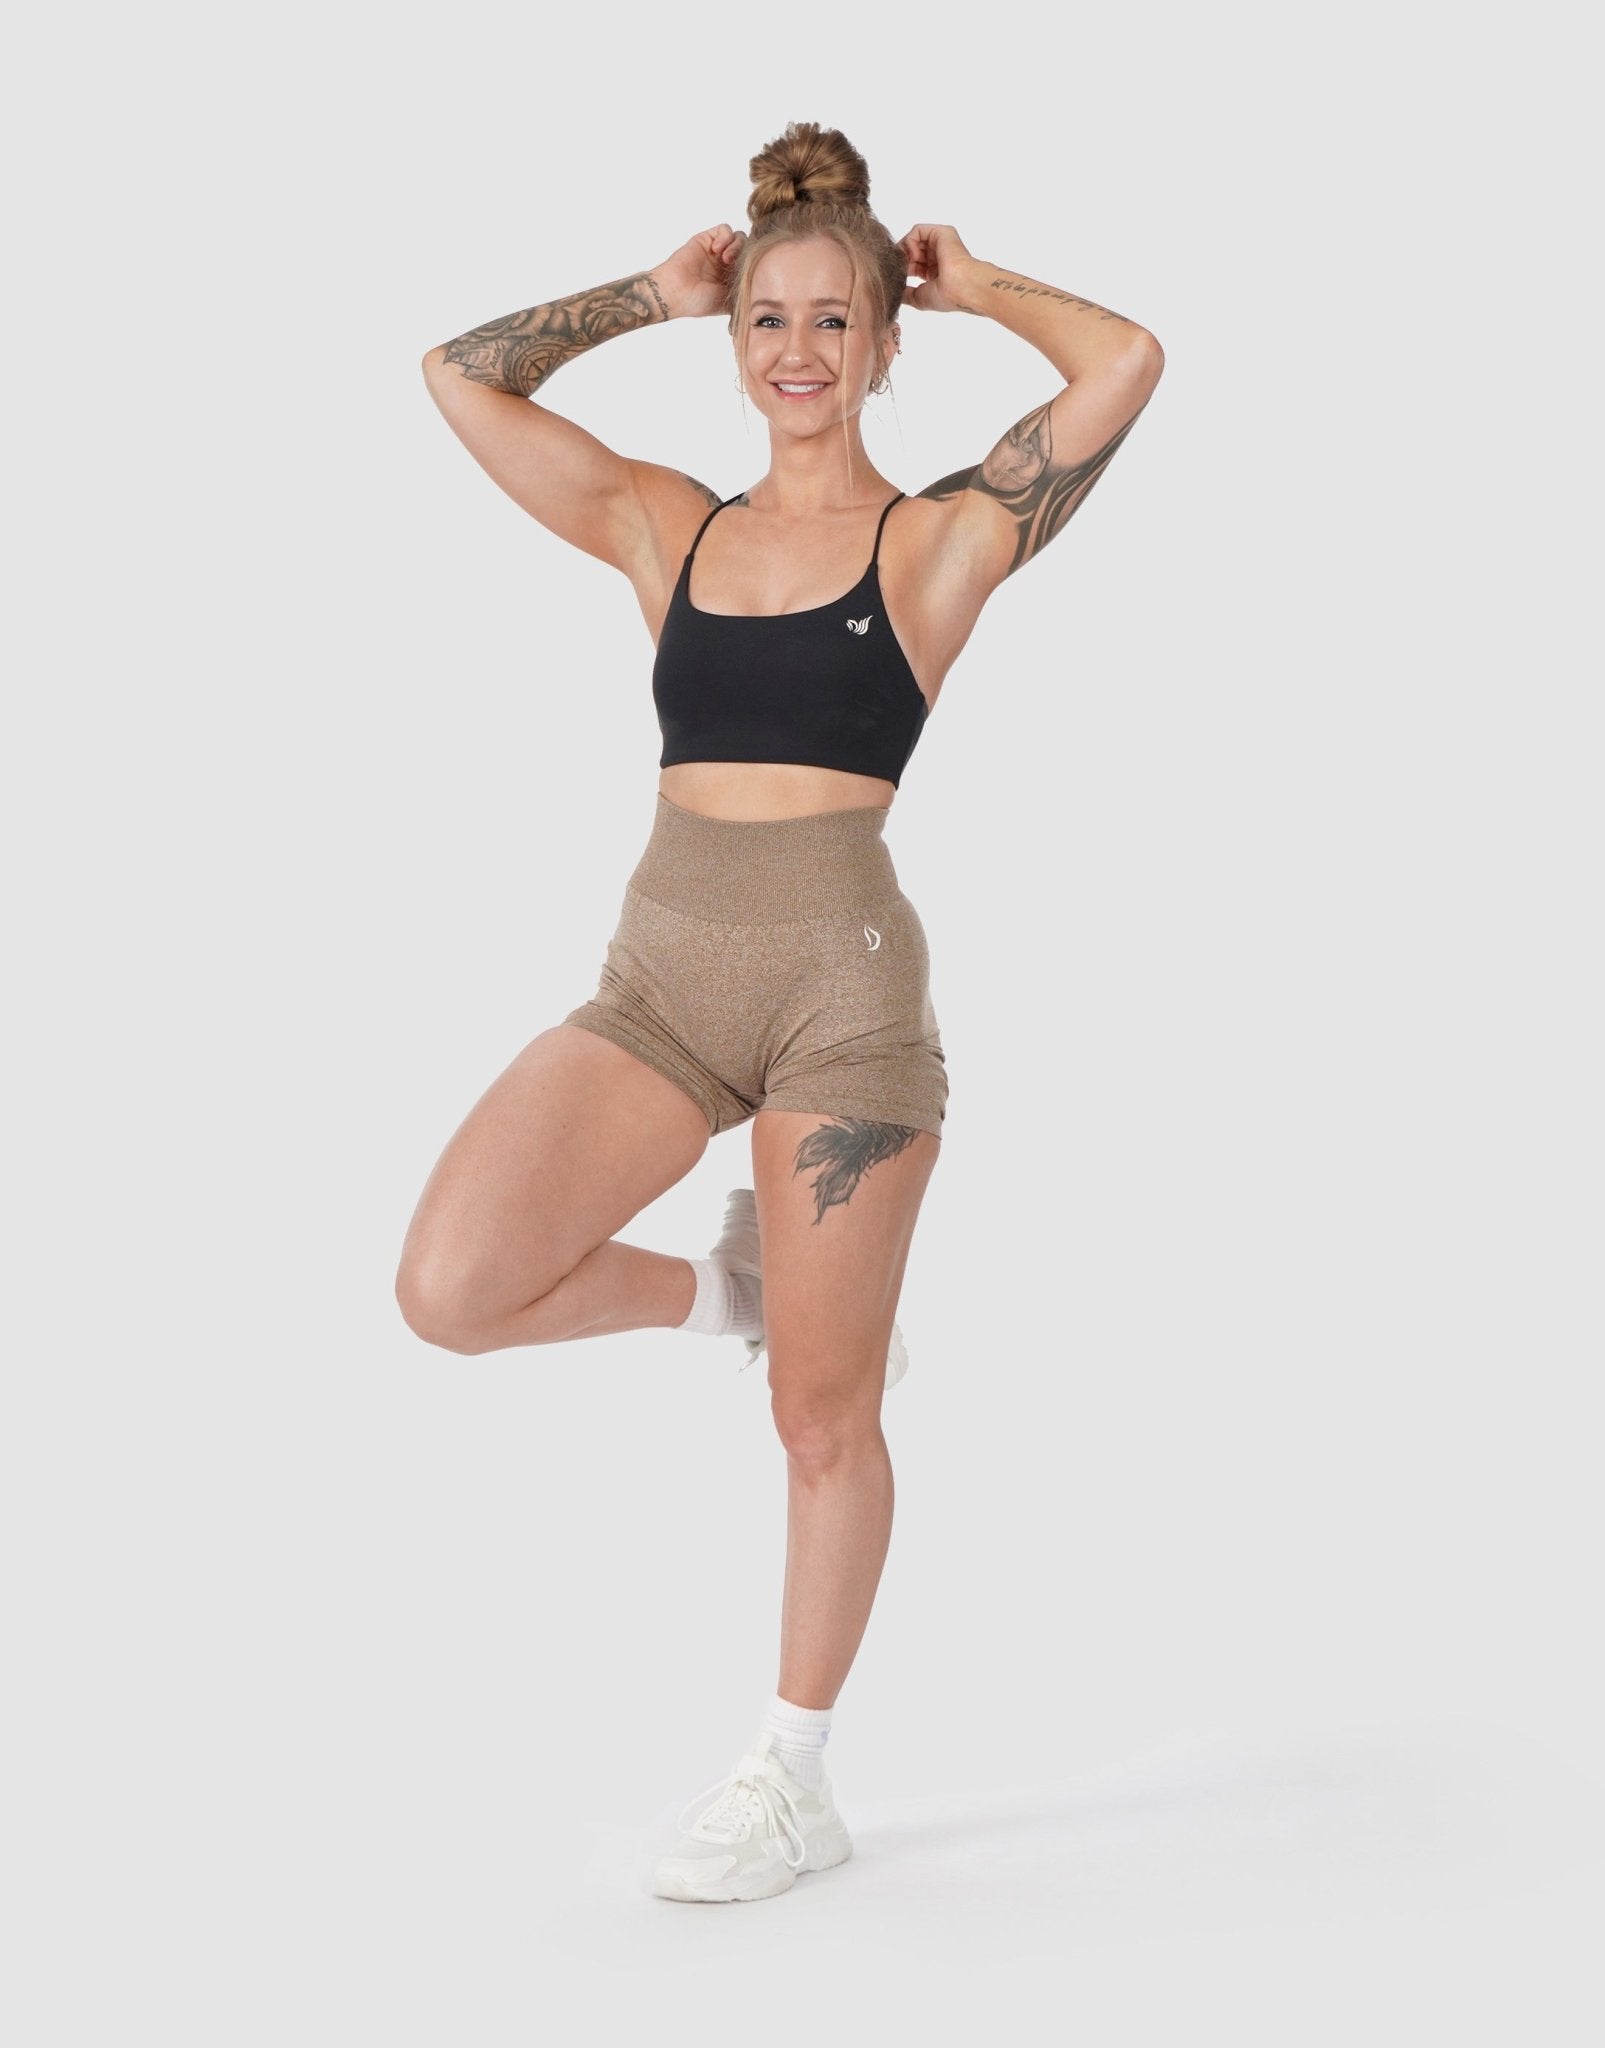 New drop this Friday at 6am PST, pocket pop shorts in beige @ bombshellsportswear 🥳